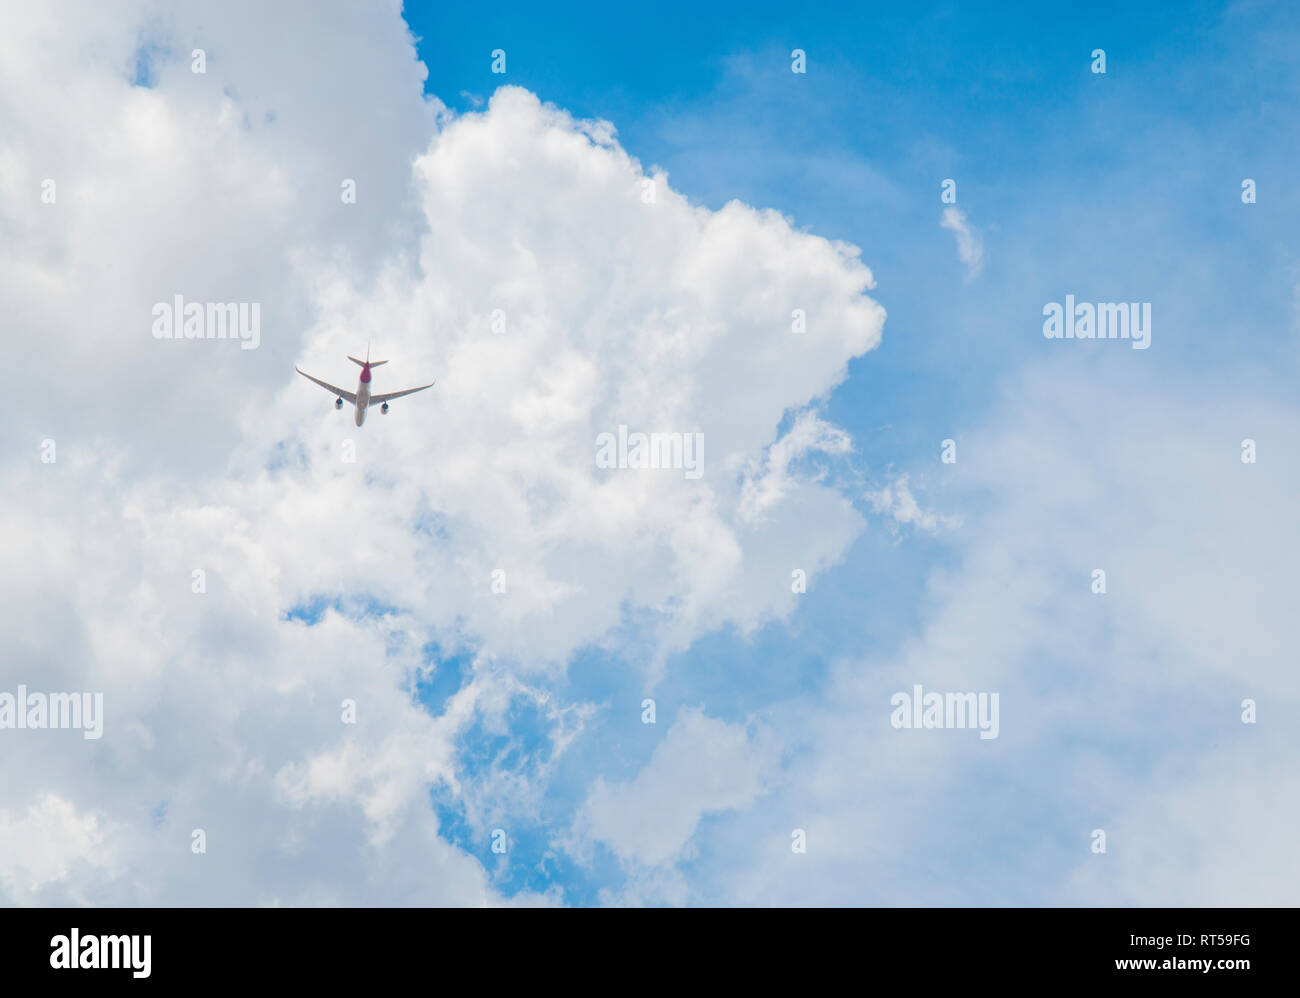 Airplane flying on cloudy sky. Stock Photo